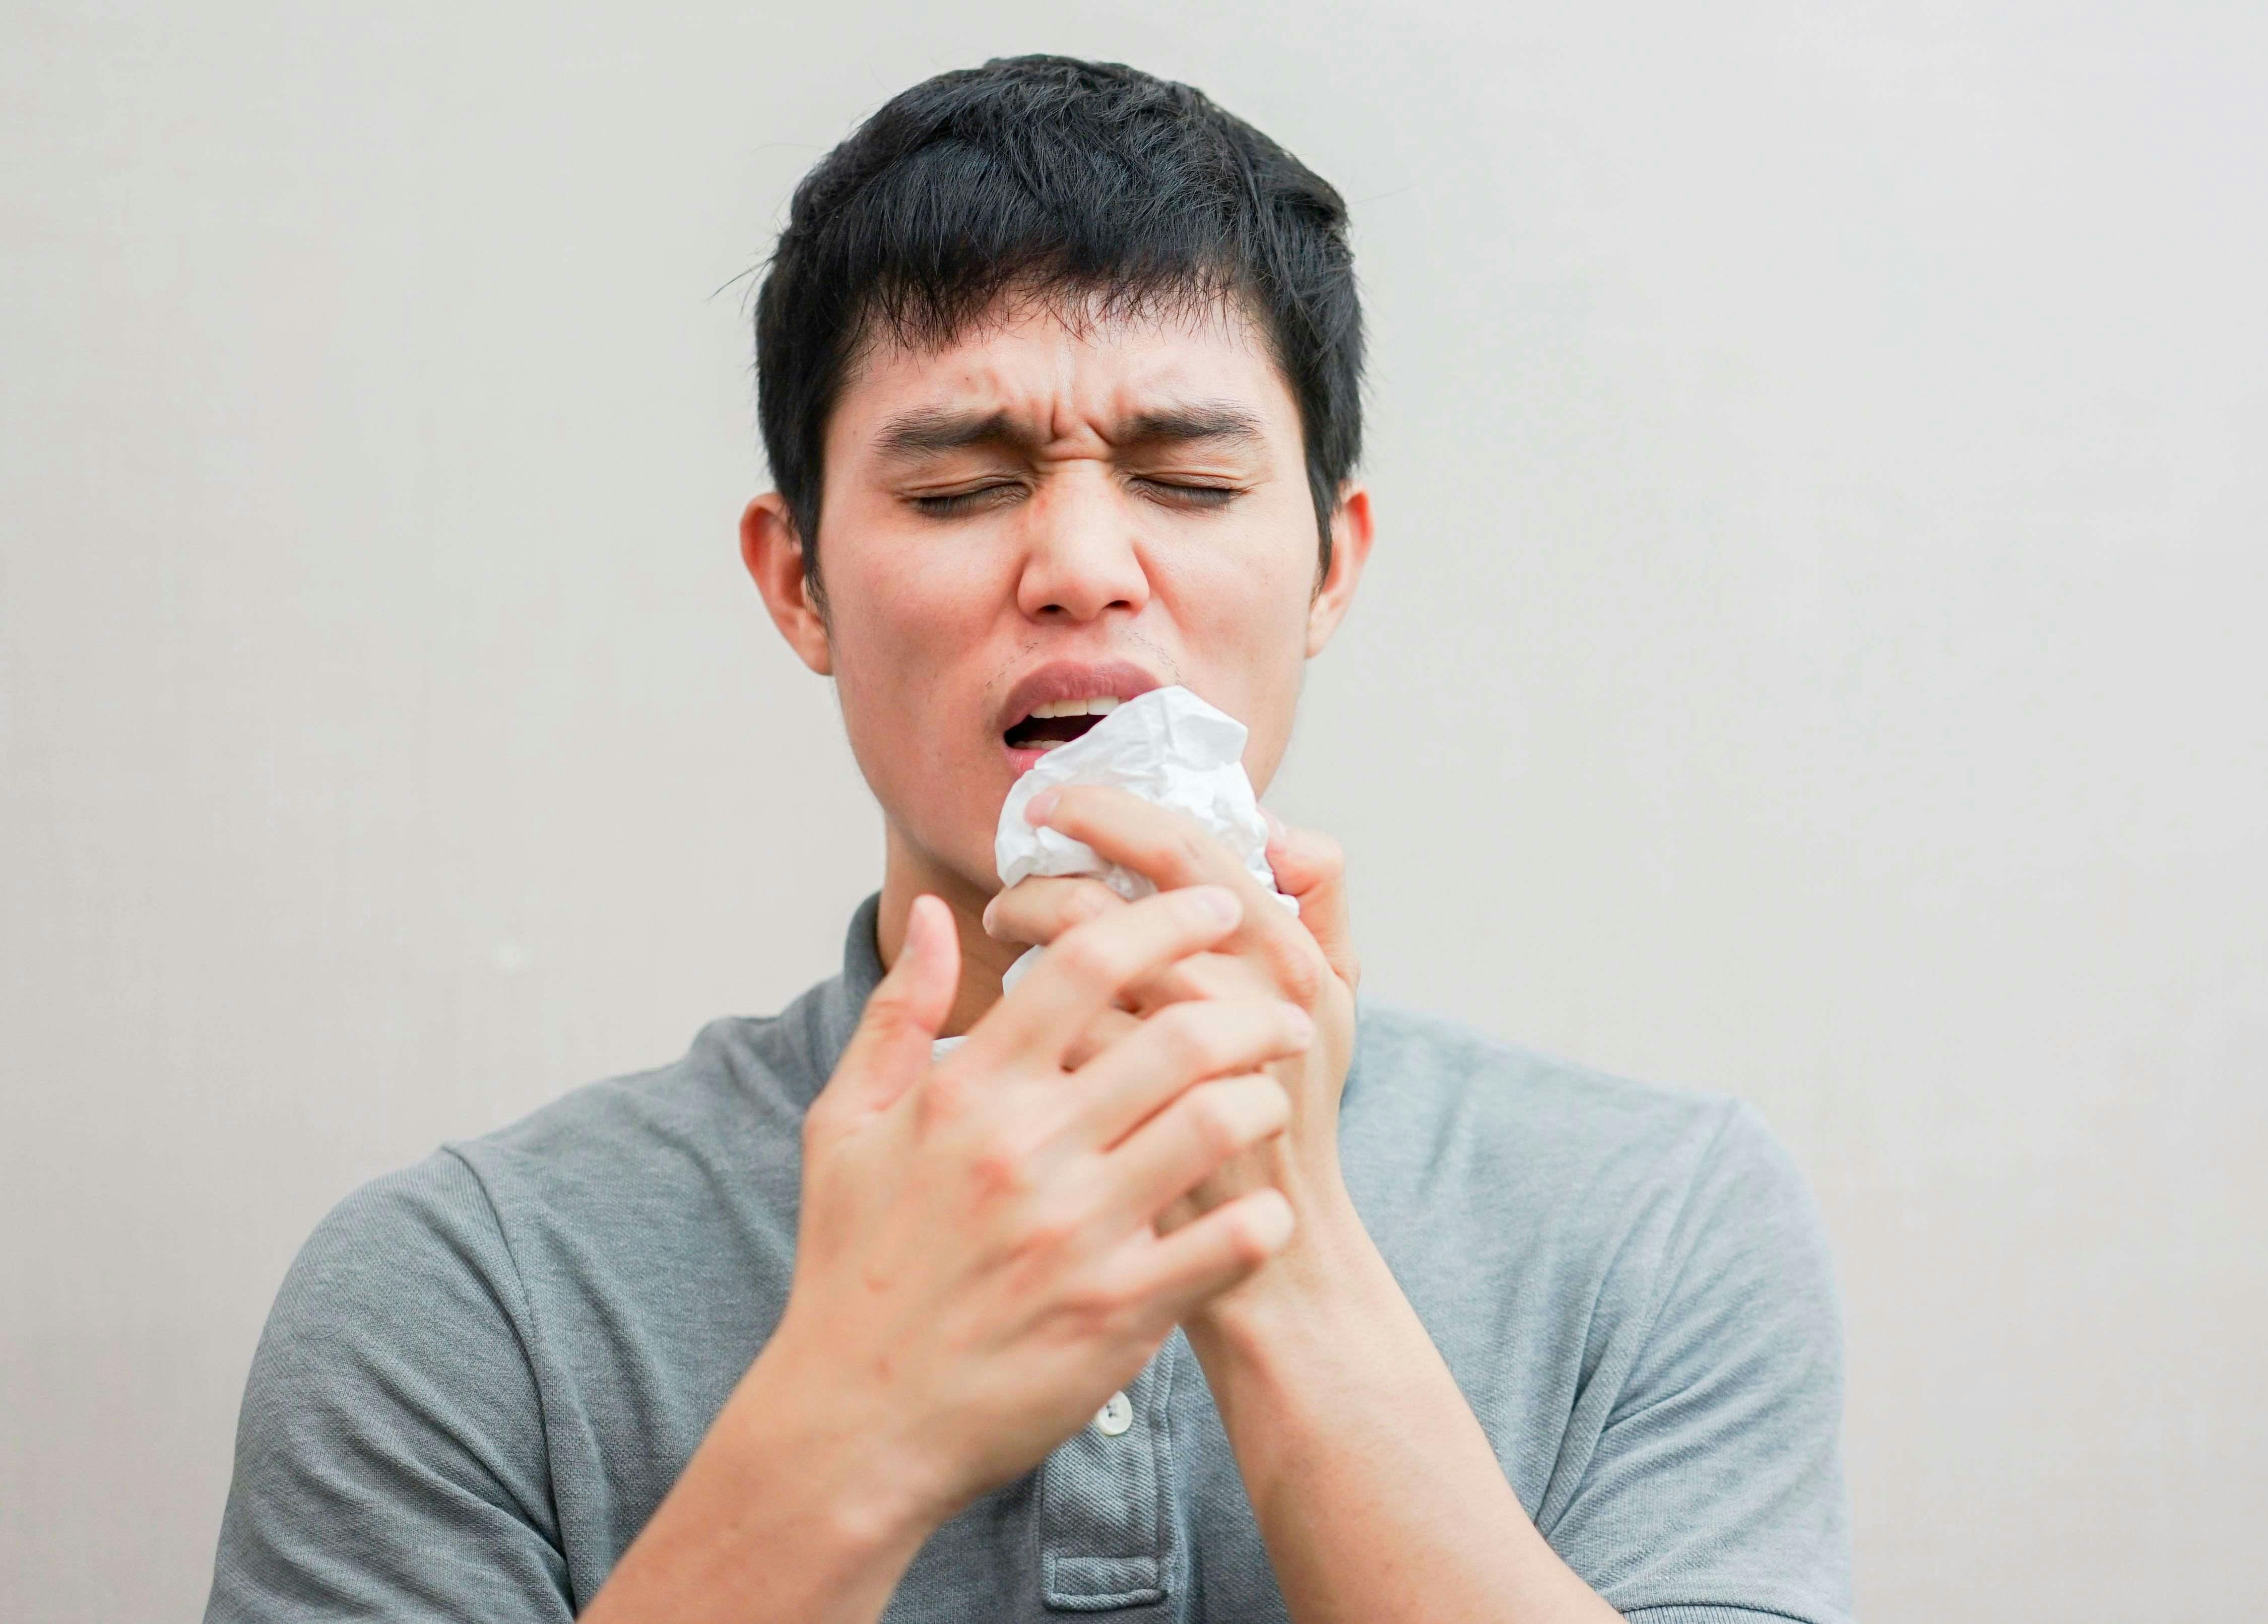 Image of man coughing into a tissue